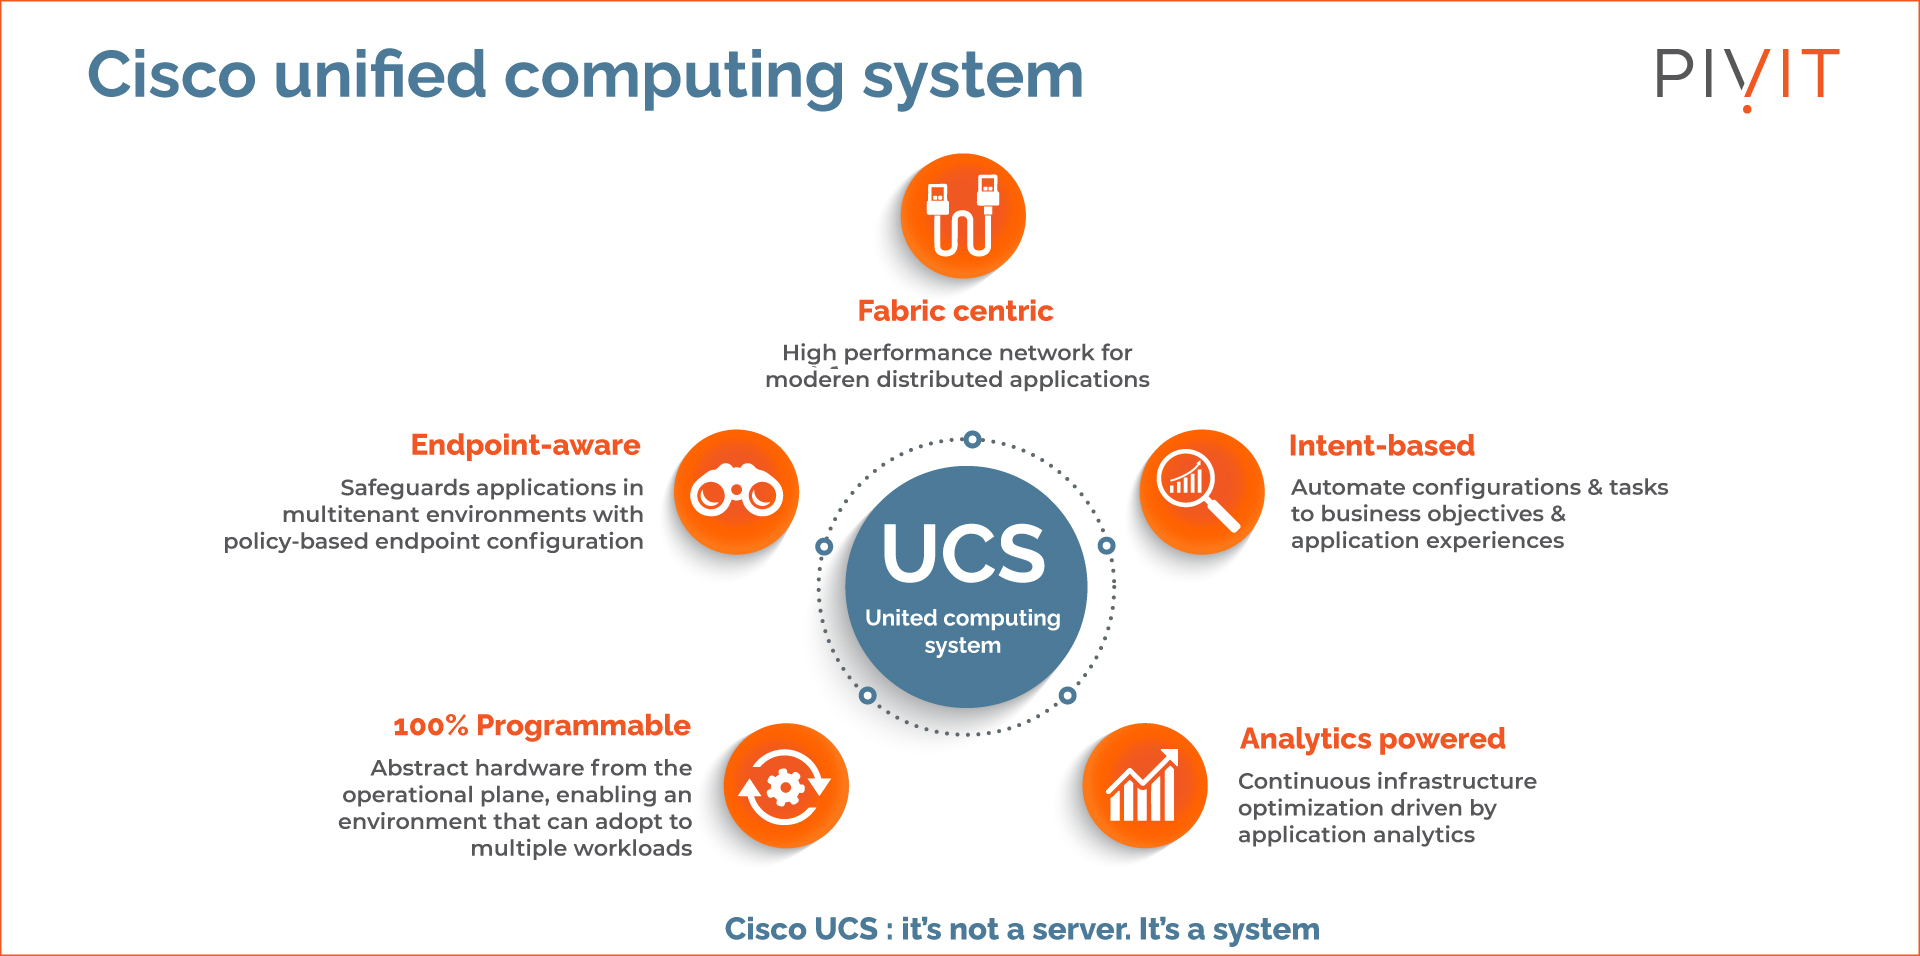 Cisco unified computing system benefits